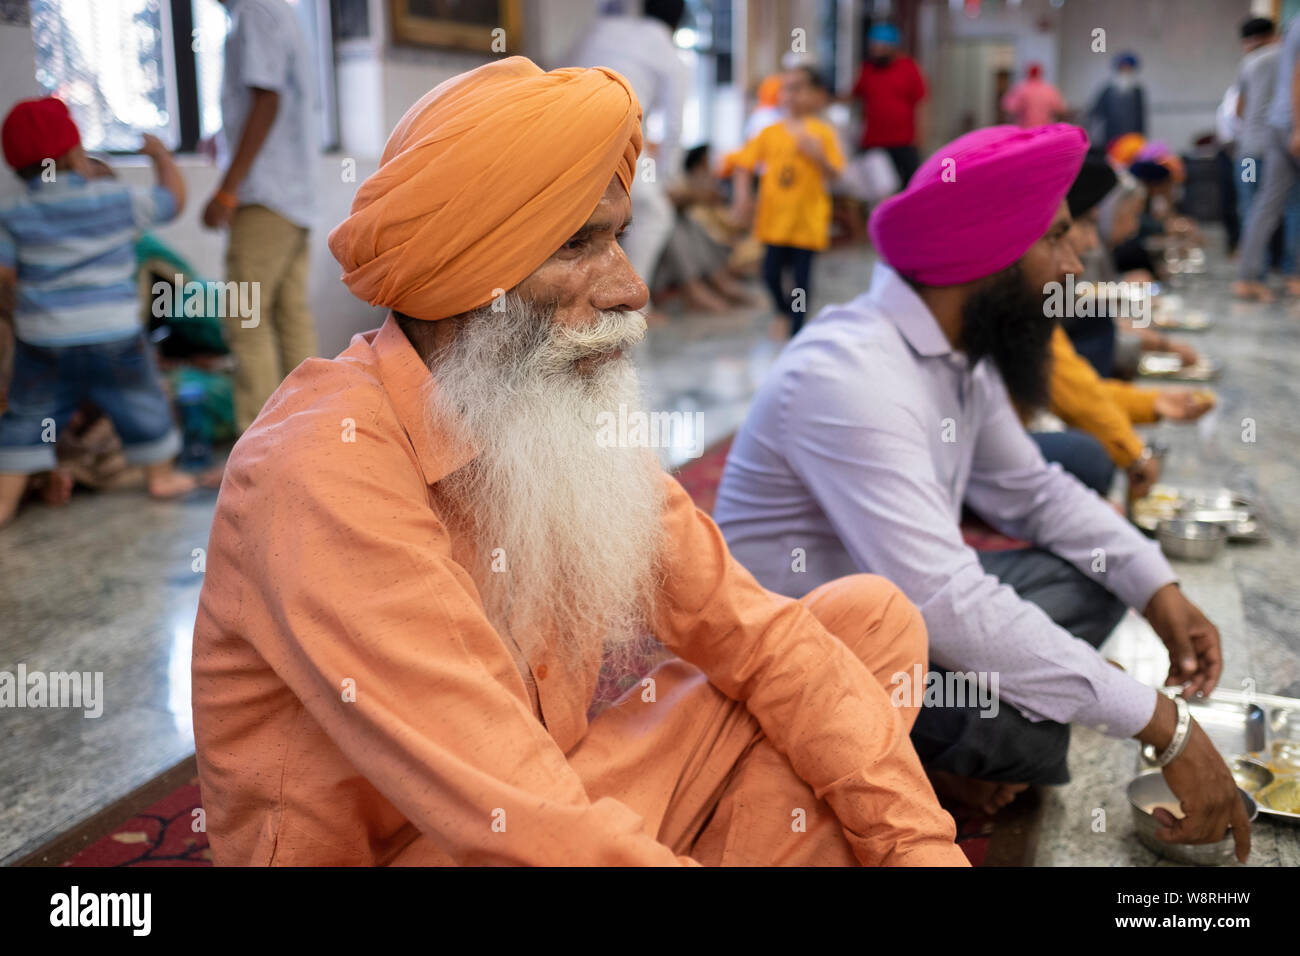 An older Sikh man dressed in orange who volunteers at a langar (communal dining hall) in a Sikh temple in South Ozone Park, Queens, New York City. Stock Photo